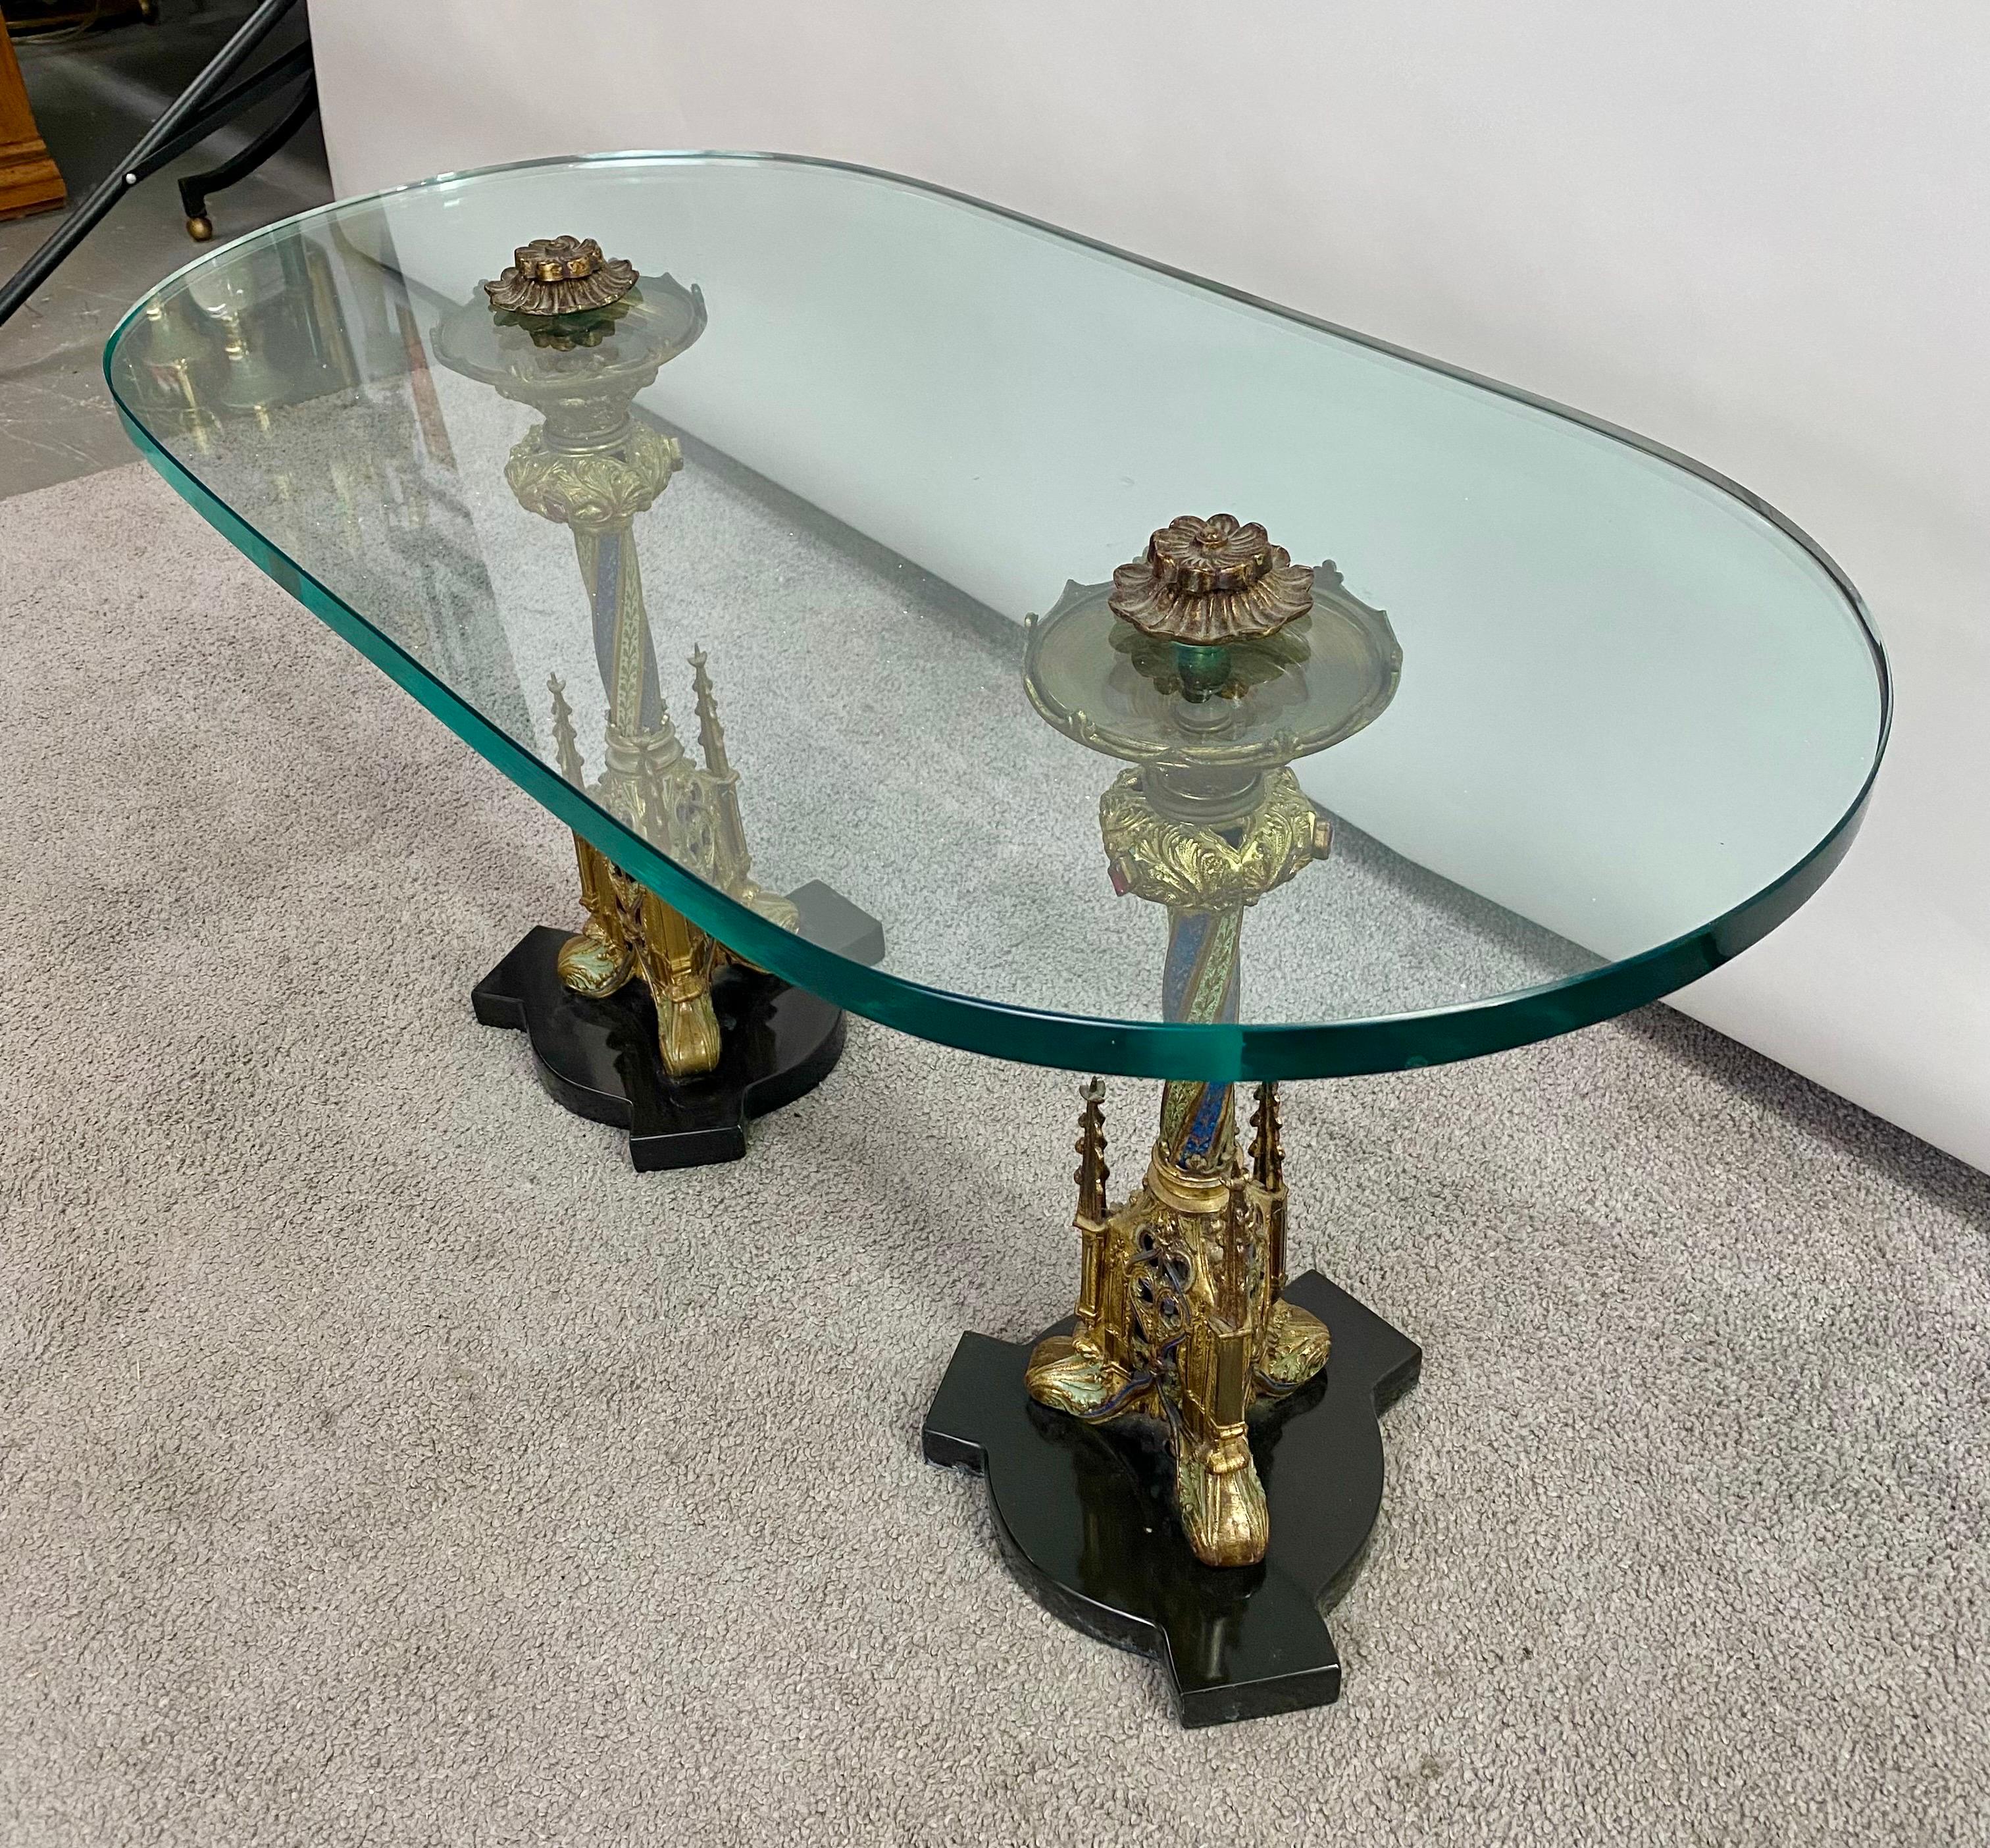 Italian Gothic Renaissance Style Brass Pedestals and Glass Top Coffee Table In Good Condition For Sale In Plainview, NY